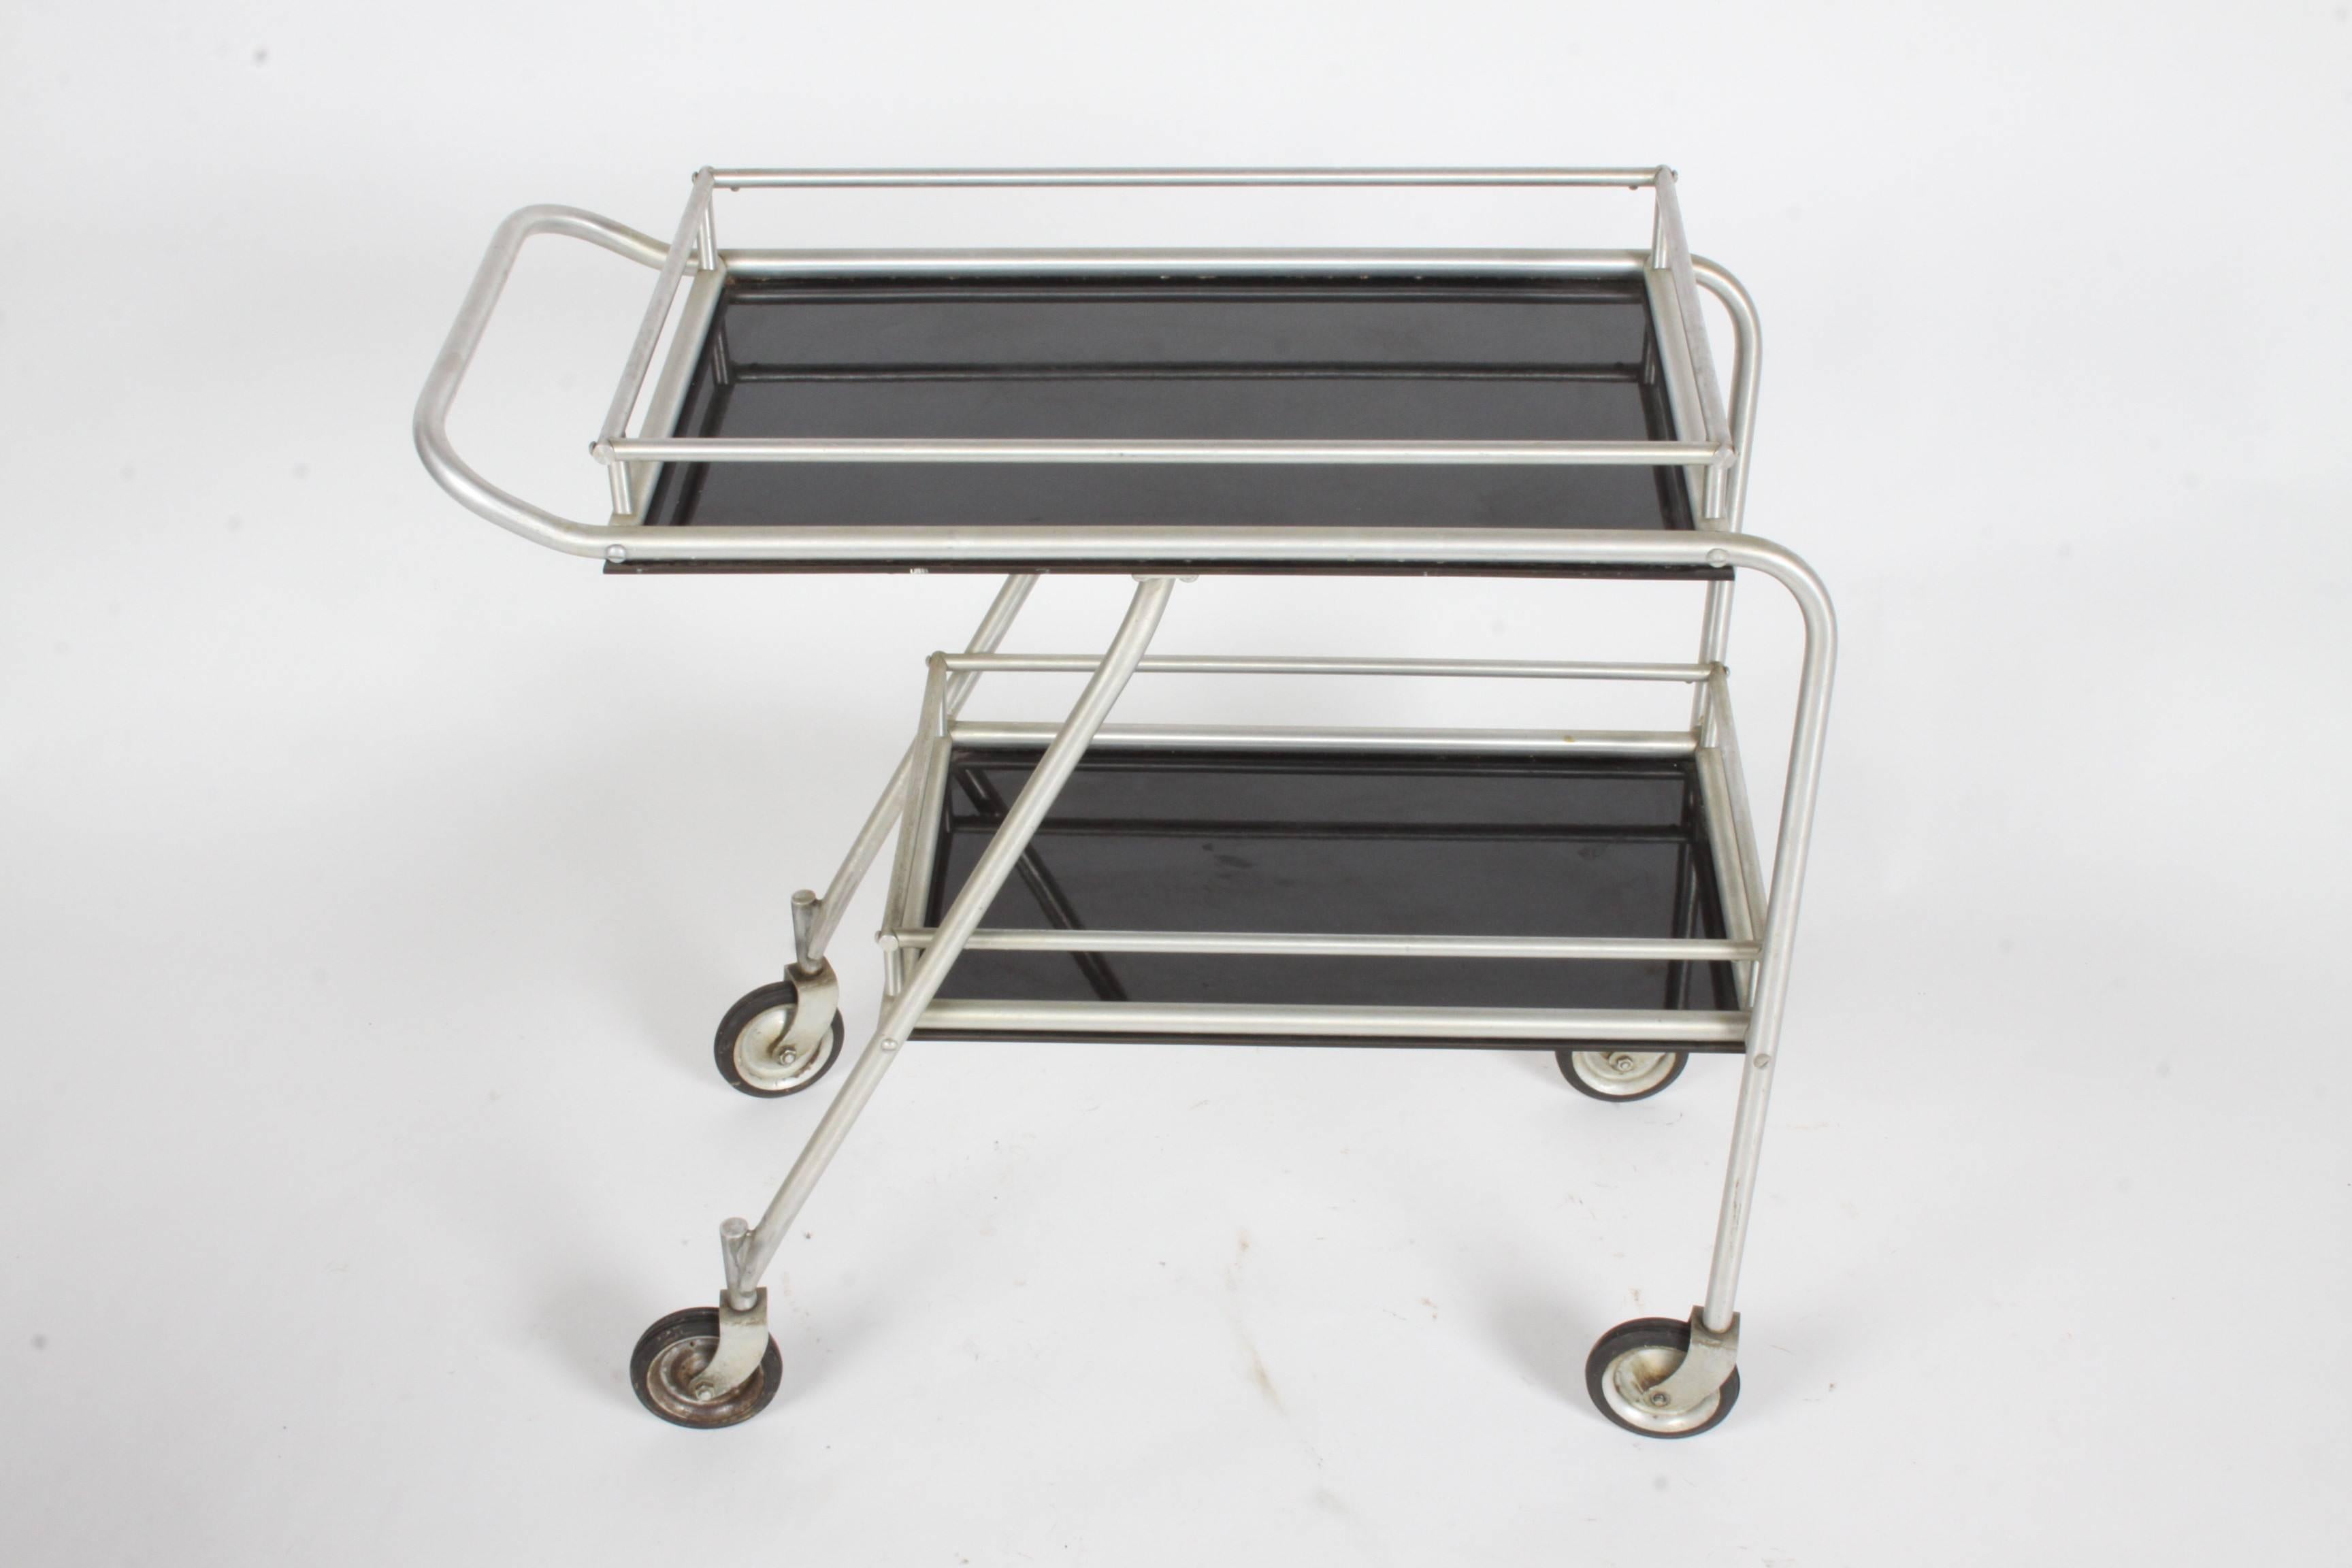 Aero Art aluminum DC3 aircraft rolling bar or serving cart in the style of Warren McArthur. Original condition, may need a little cleaning to the wheels or aluminum if desired. This version has the top and bottom rail. See my other listing for